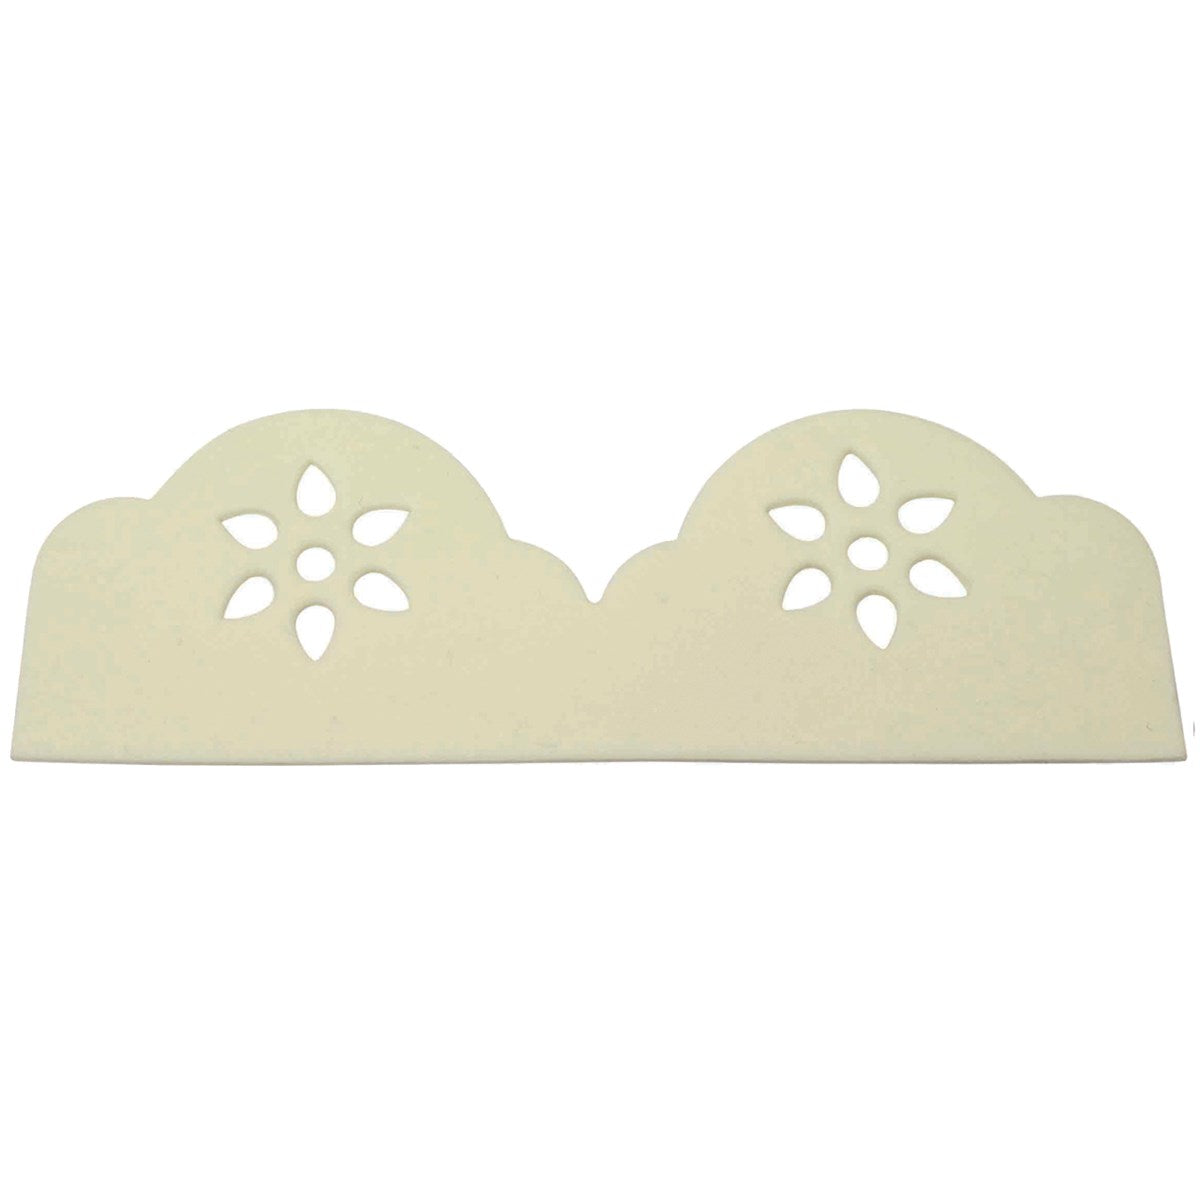 PME Broderie & 6 Petal Eyelet Cutter 2pc